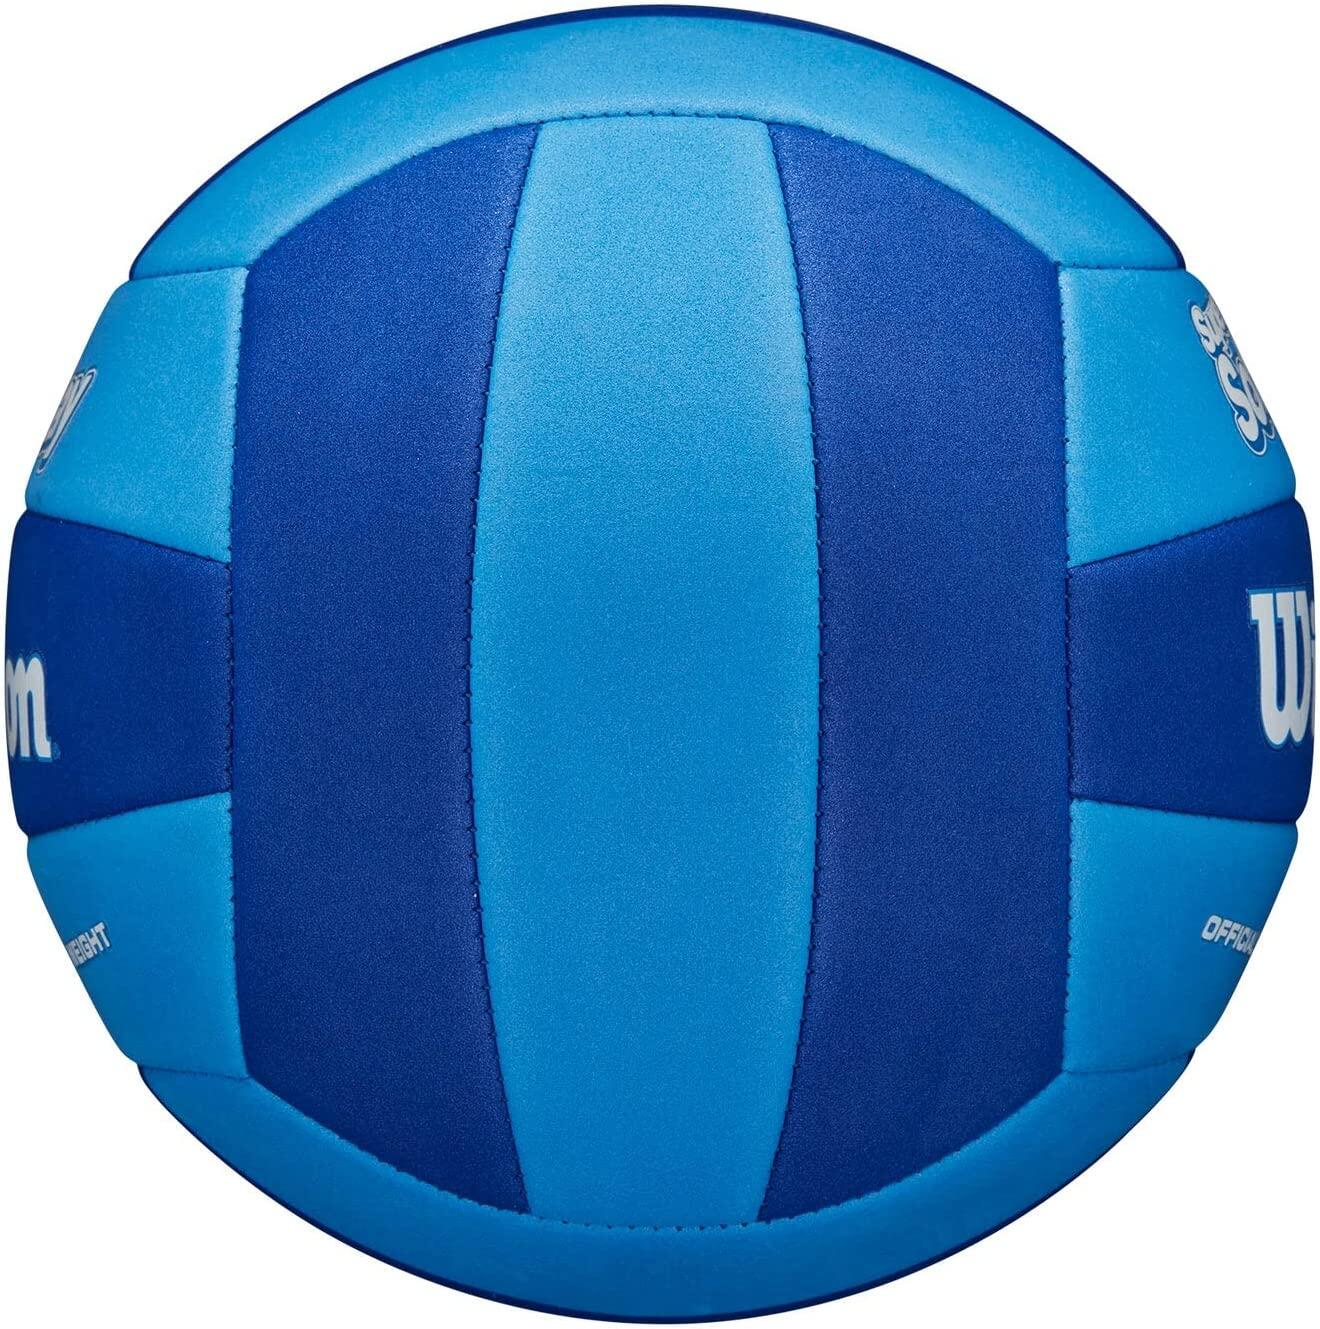 WILSON SUPER SOFT PLAY VOLLEYBALL - OFFICIAL SIZE 4/6